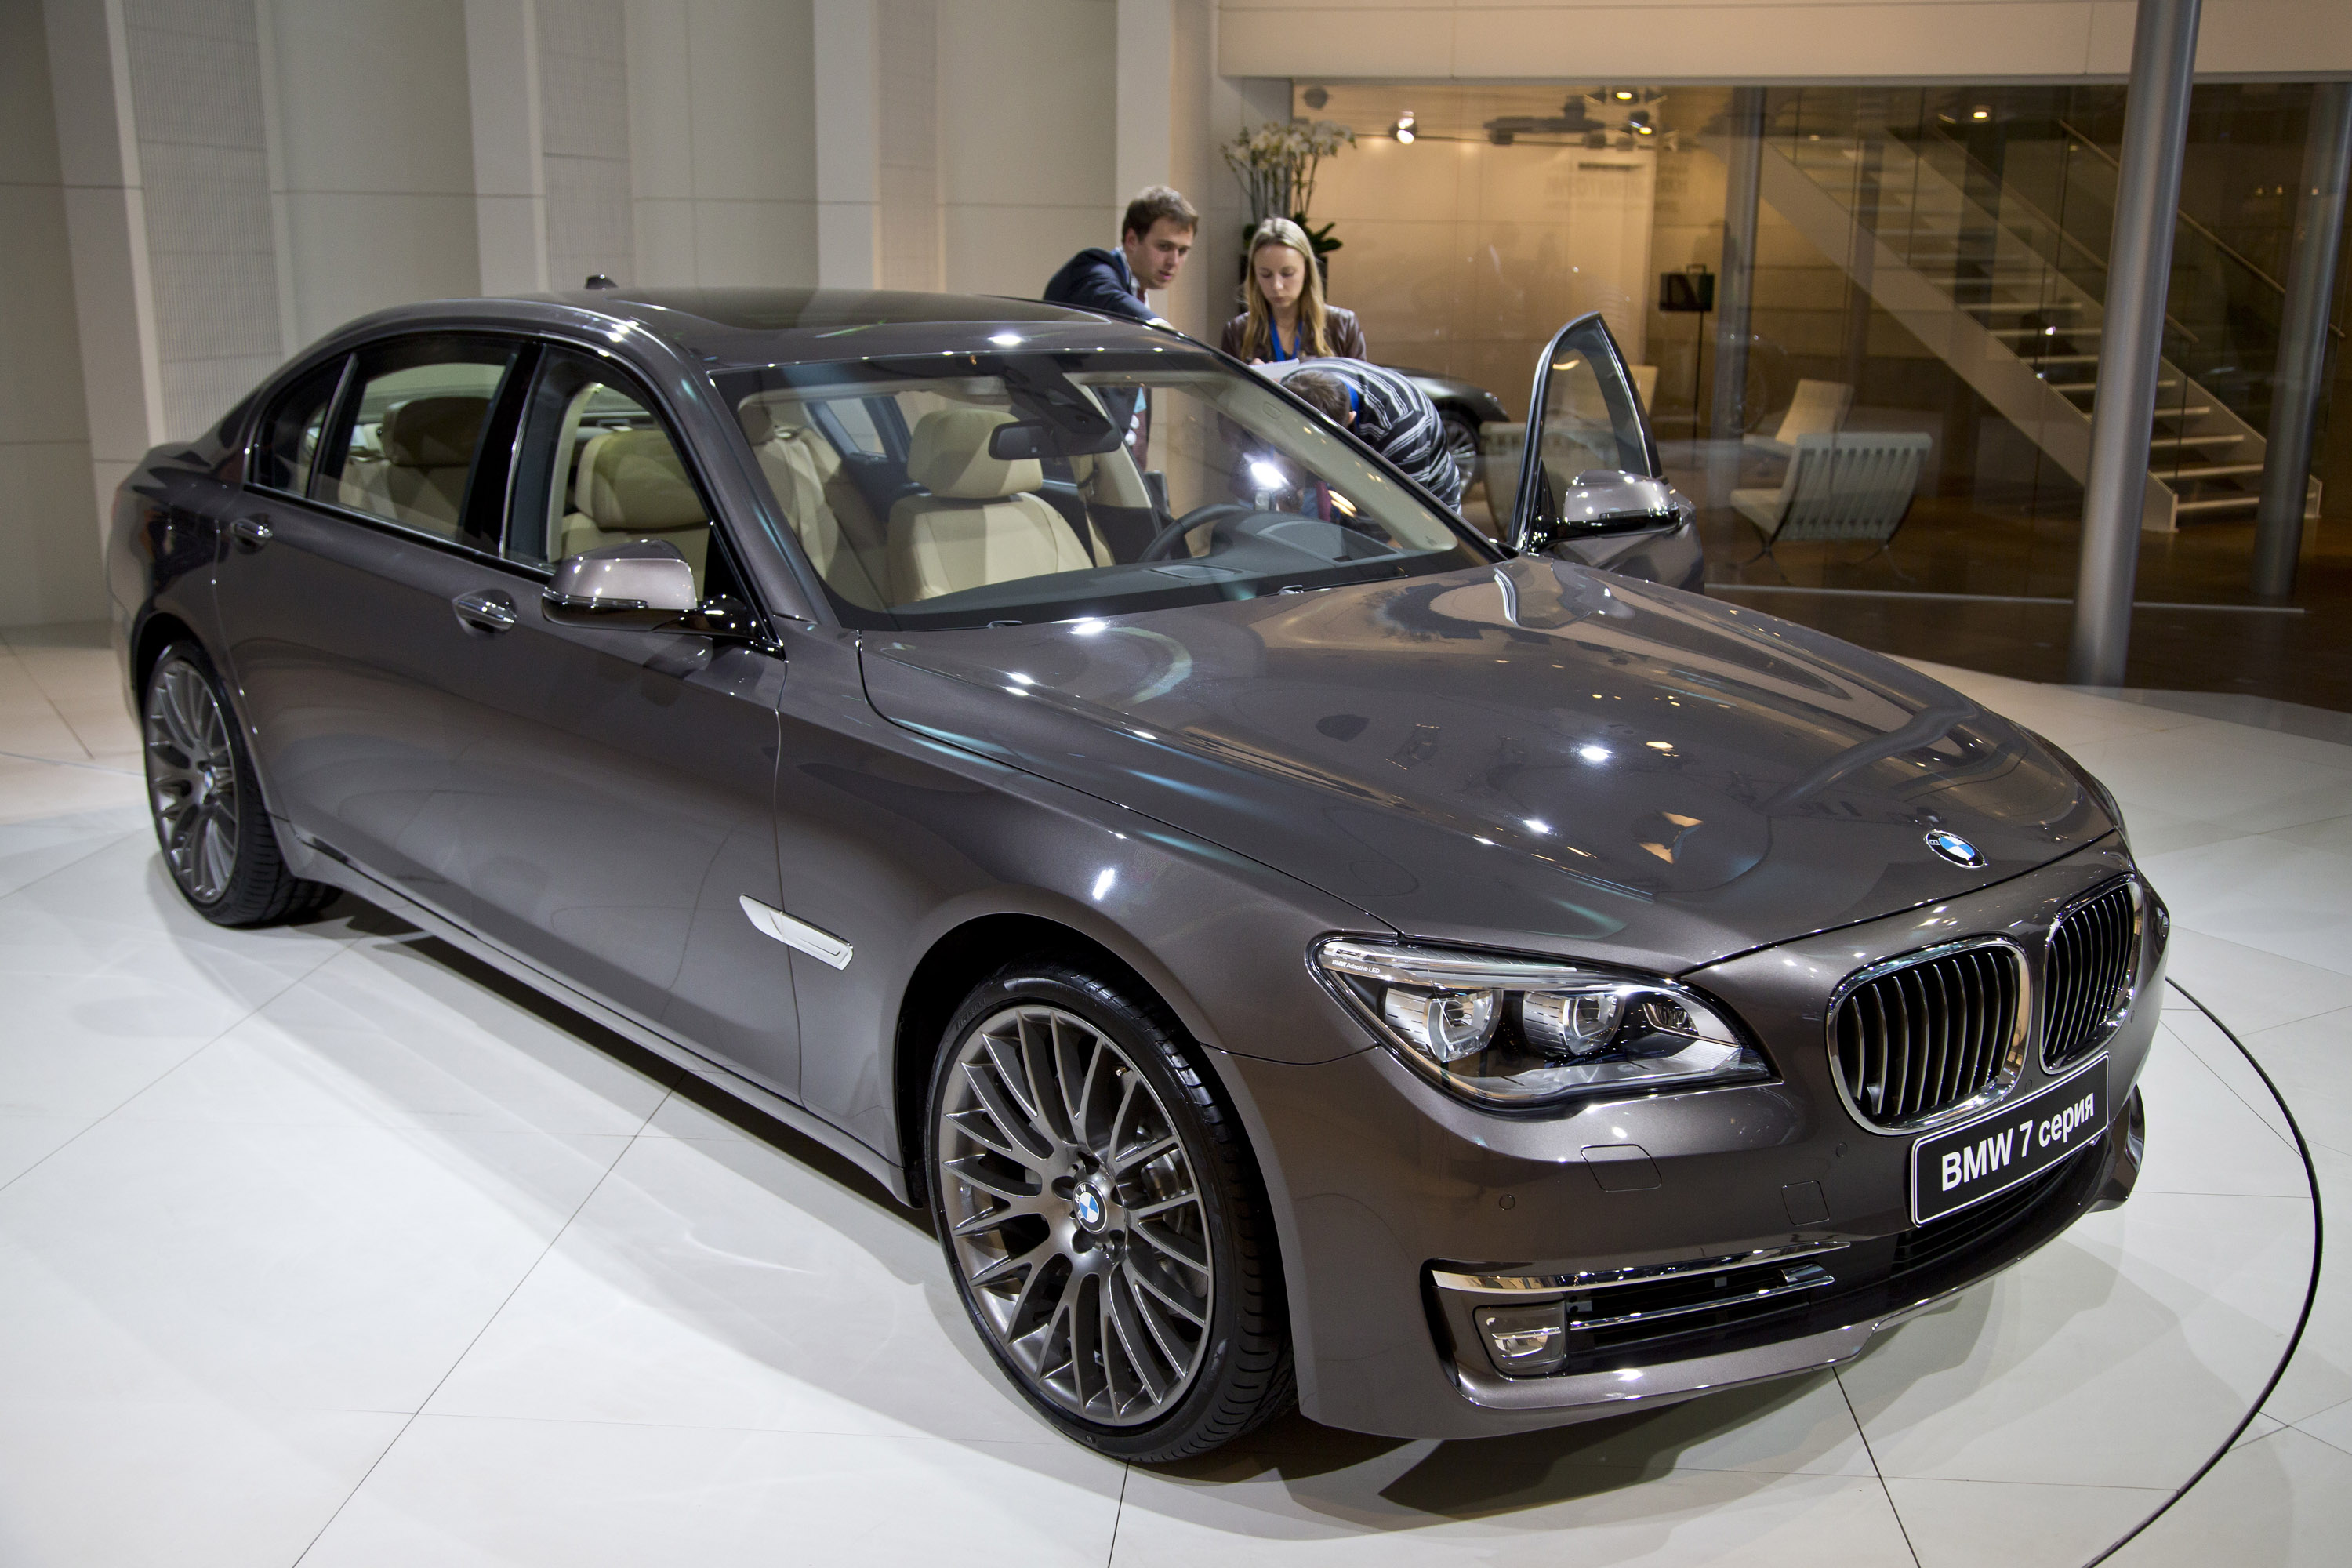 BMW 7-Series Moscow 2012 - Picture 73820